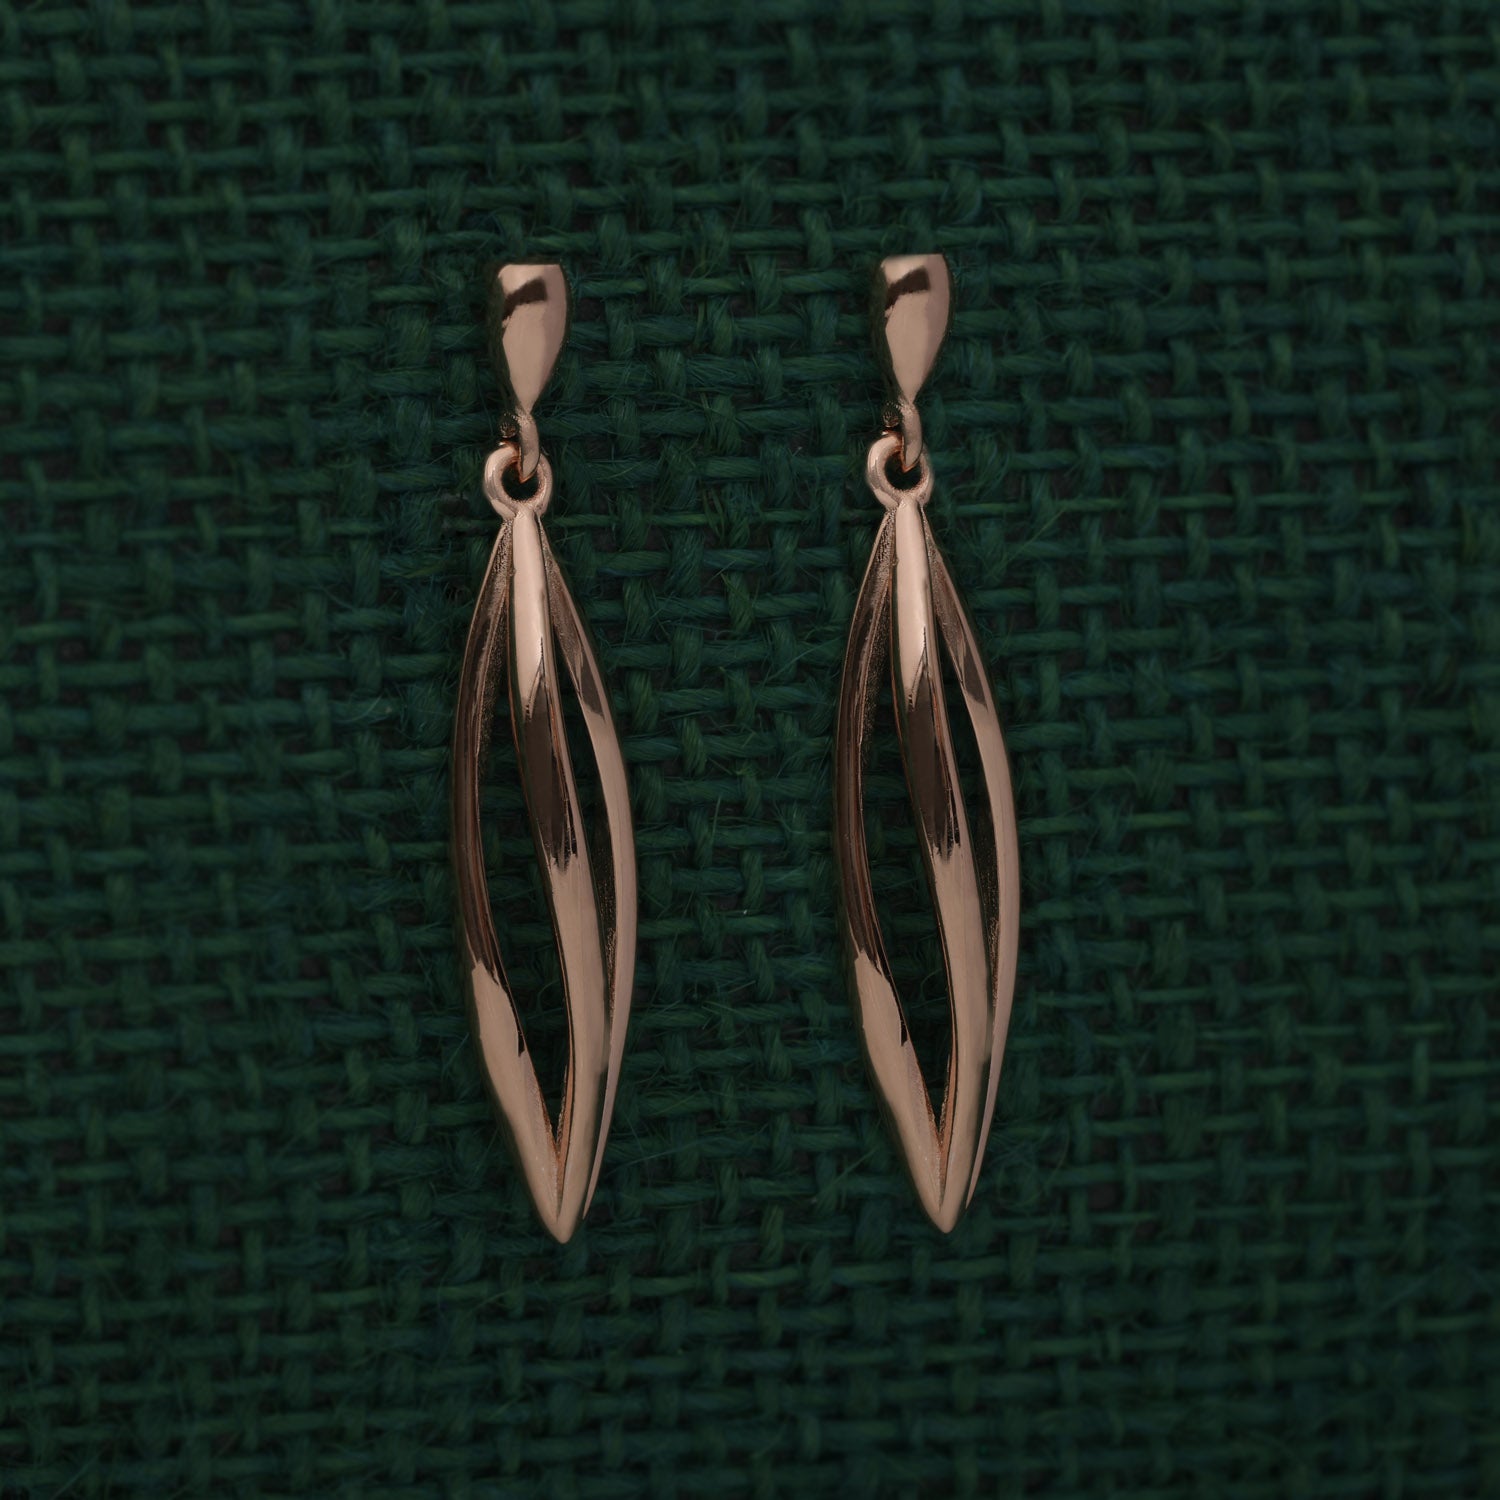 Silver Breeze: Leaf-shaped Earrings with a Rose Gold Gleam | SKU: 0002930411, 0002930442, 0002930428, 0002930435, 0002930404, 0019203201, 0019203164, 0019203249, 0019203225